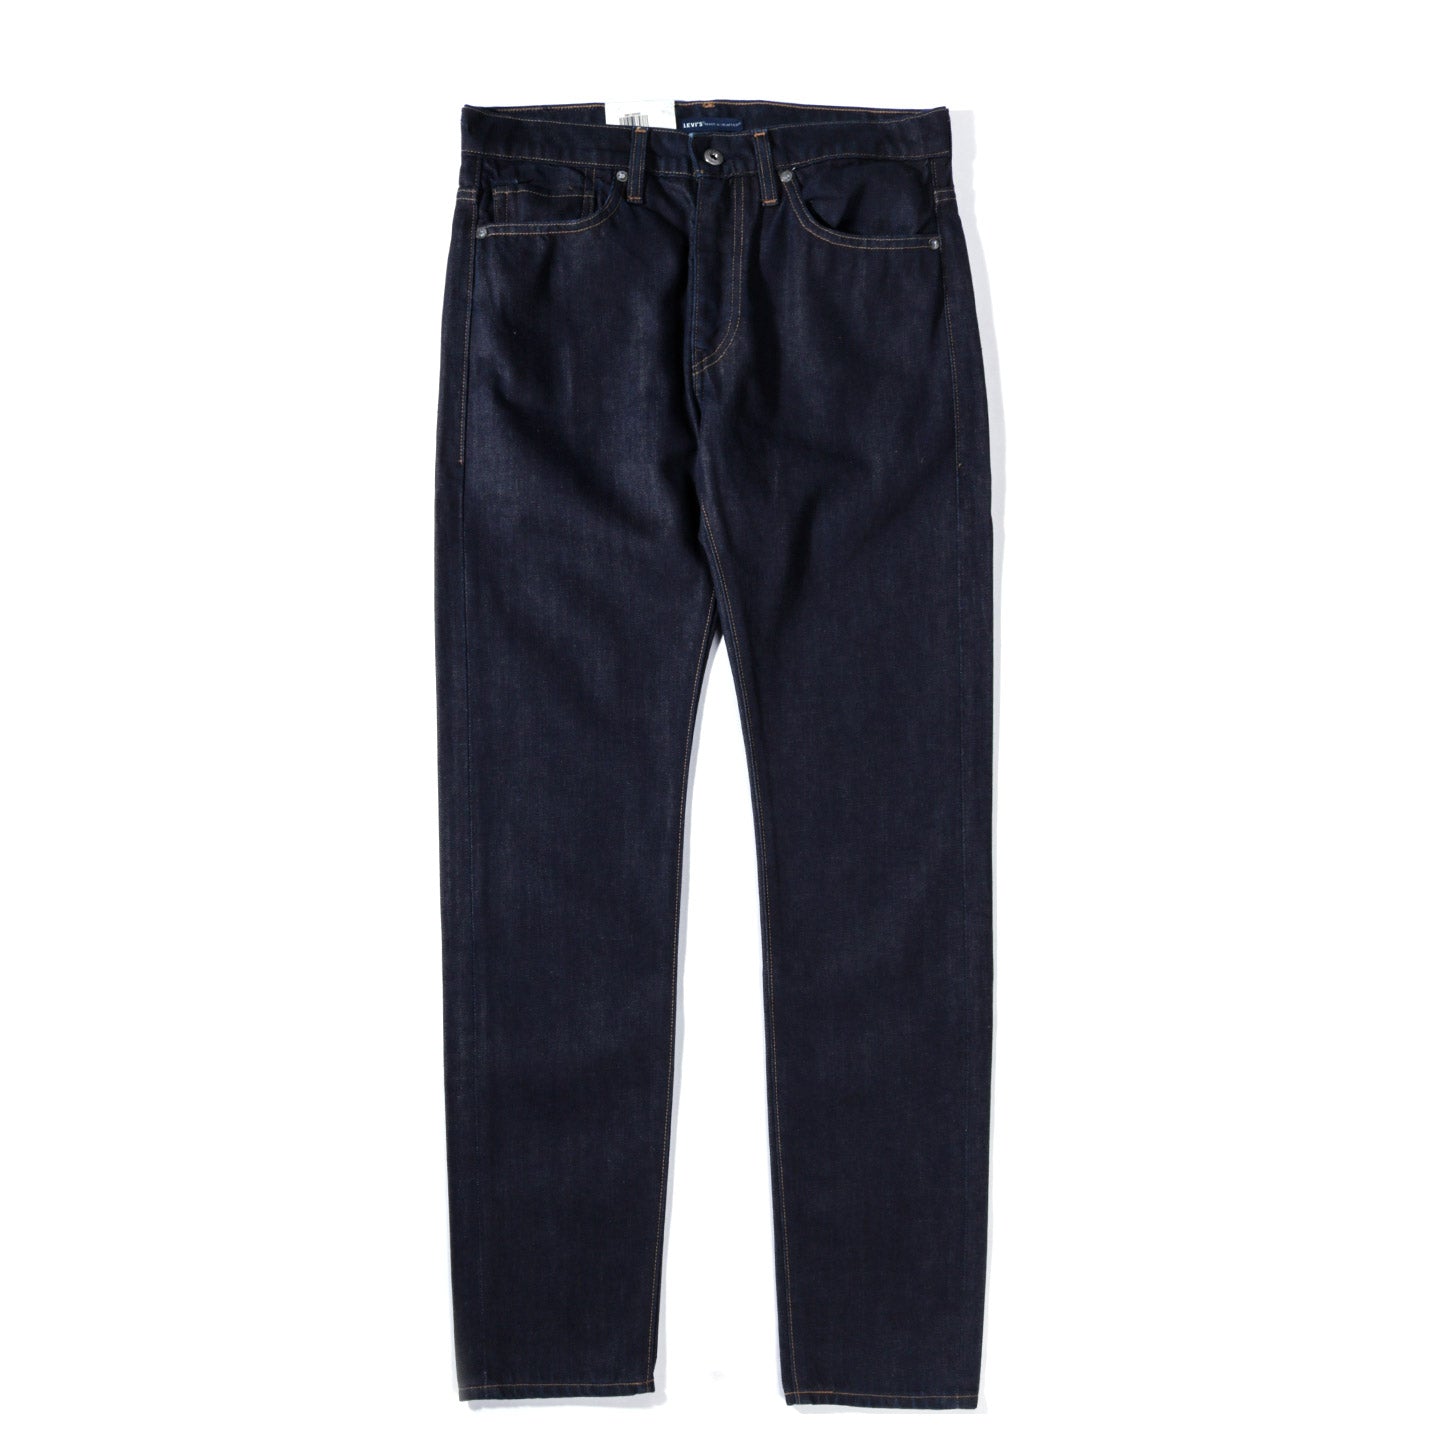 LEVI'S MADE & CRAFTED 510 INDIGO RESIN | TODAY CLOTHING